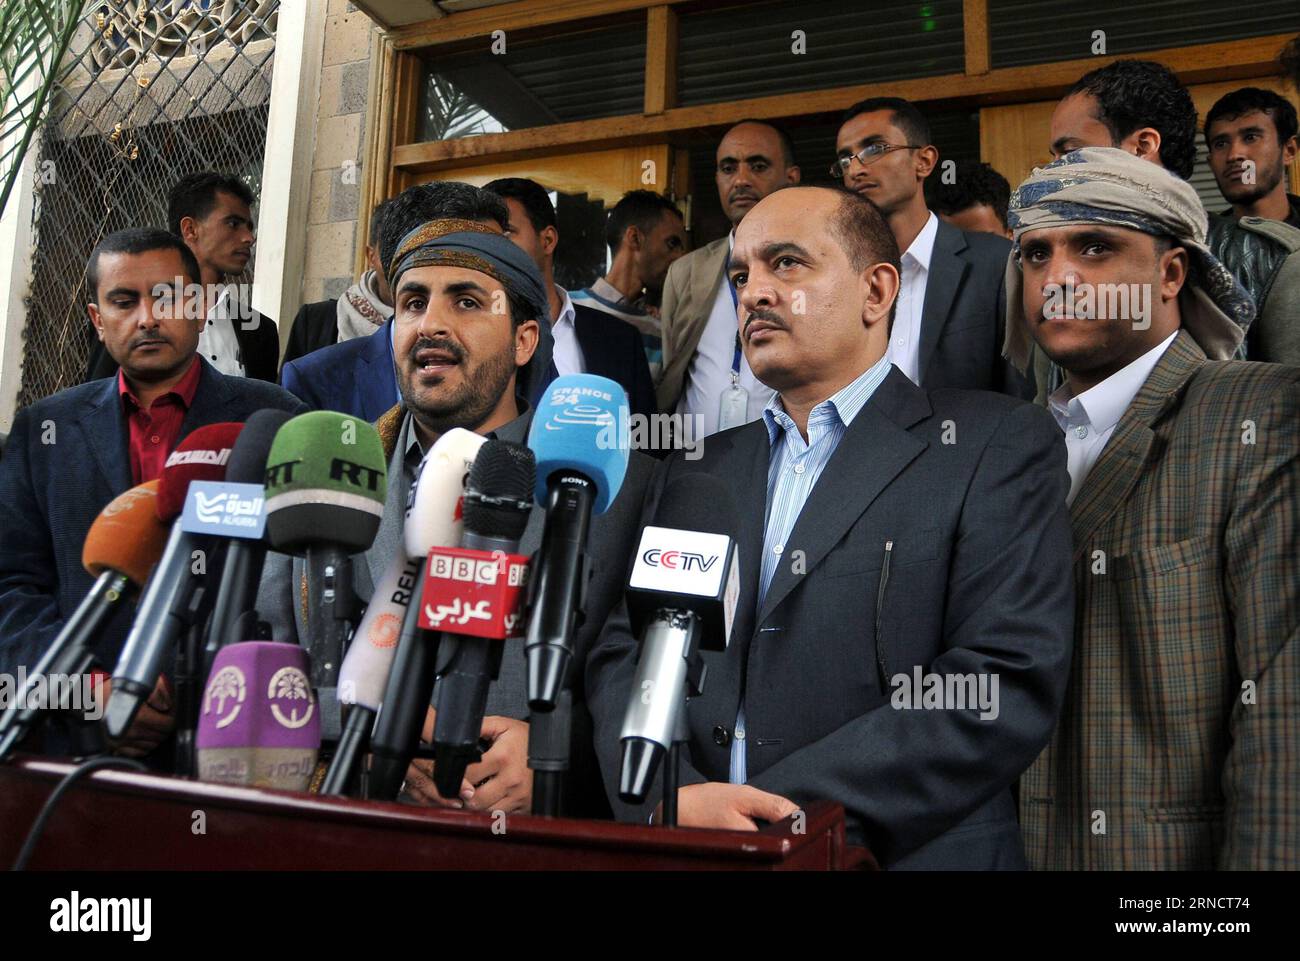 Jemen: Huthi stimmen Friedensgesprächen zu (160420) -- SANAA, April 20, 2016 -- Houthi spokesman Mohammed Abdulsalam (L, front) speaks during a press conference at the Sanaa International Airport in Yemen, on April 20, 2016. Yemen s rebel Shiite Houthi group and its allies loyal to former President Ali Abdullah Saleh have agreed to take part in the delayed peace talks sponsored by the United Nations, the group said on Wednesday. In a letter to the UN envoy to Yemen Ismail Ould Cheikh Ahmed on Tuesday, the Houthi group and its allies confirmed that their delegates will travel to Kuwait for the Stock Photo